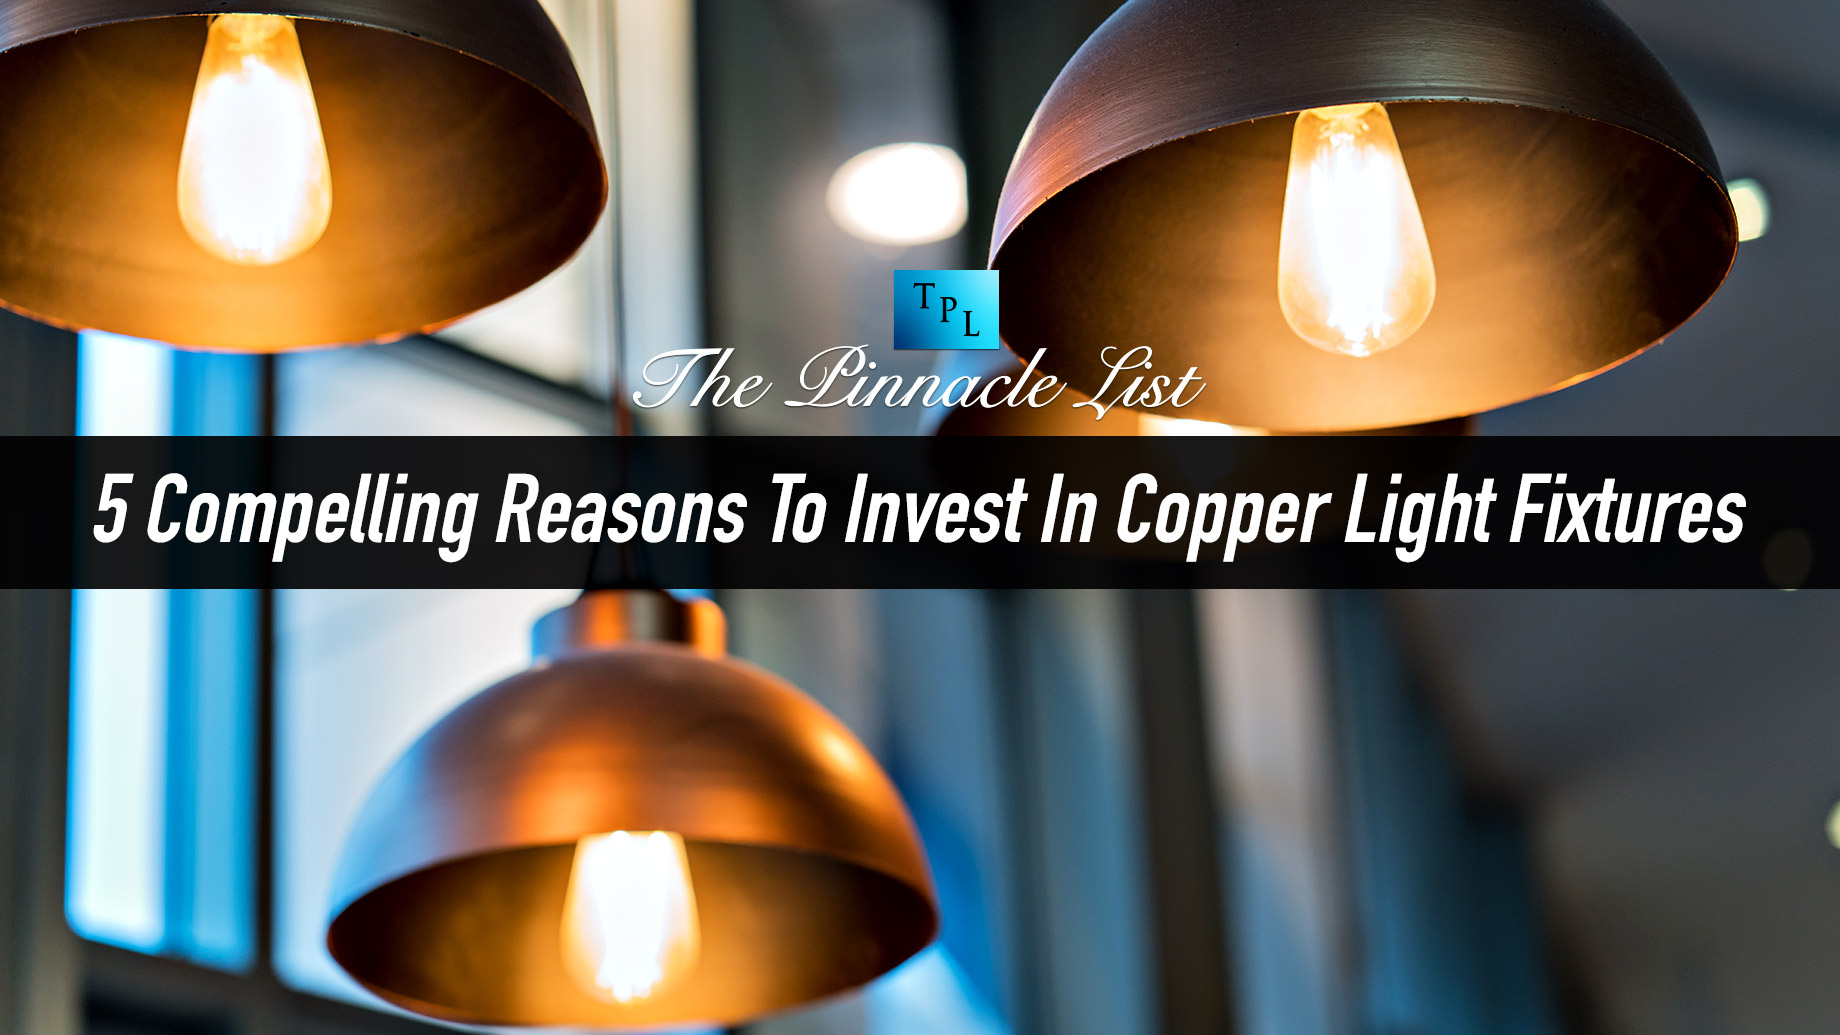 5 Compelling Reasons To Invest In Copper Light Fixtures